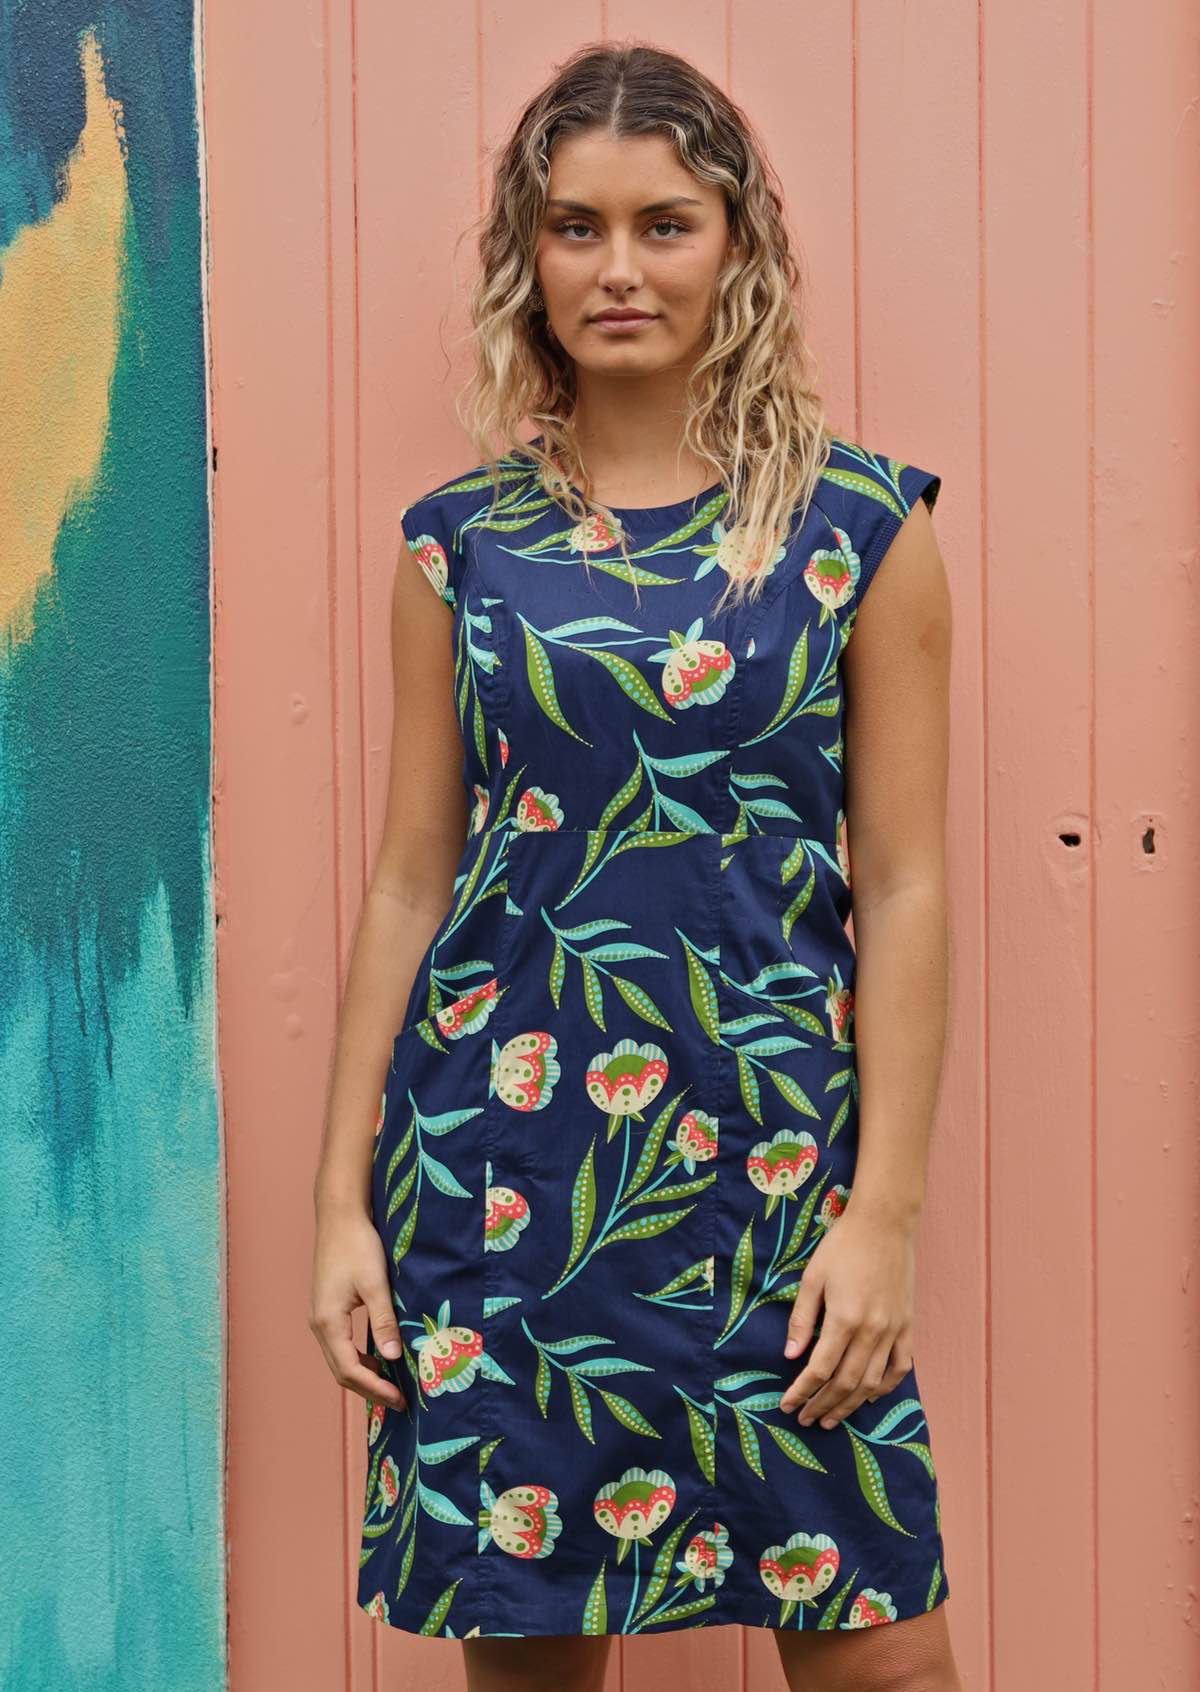 Women wears floral dress with pockets. 